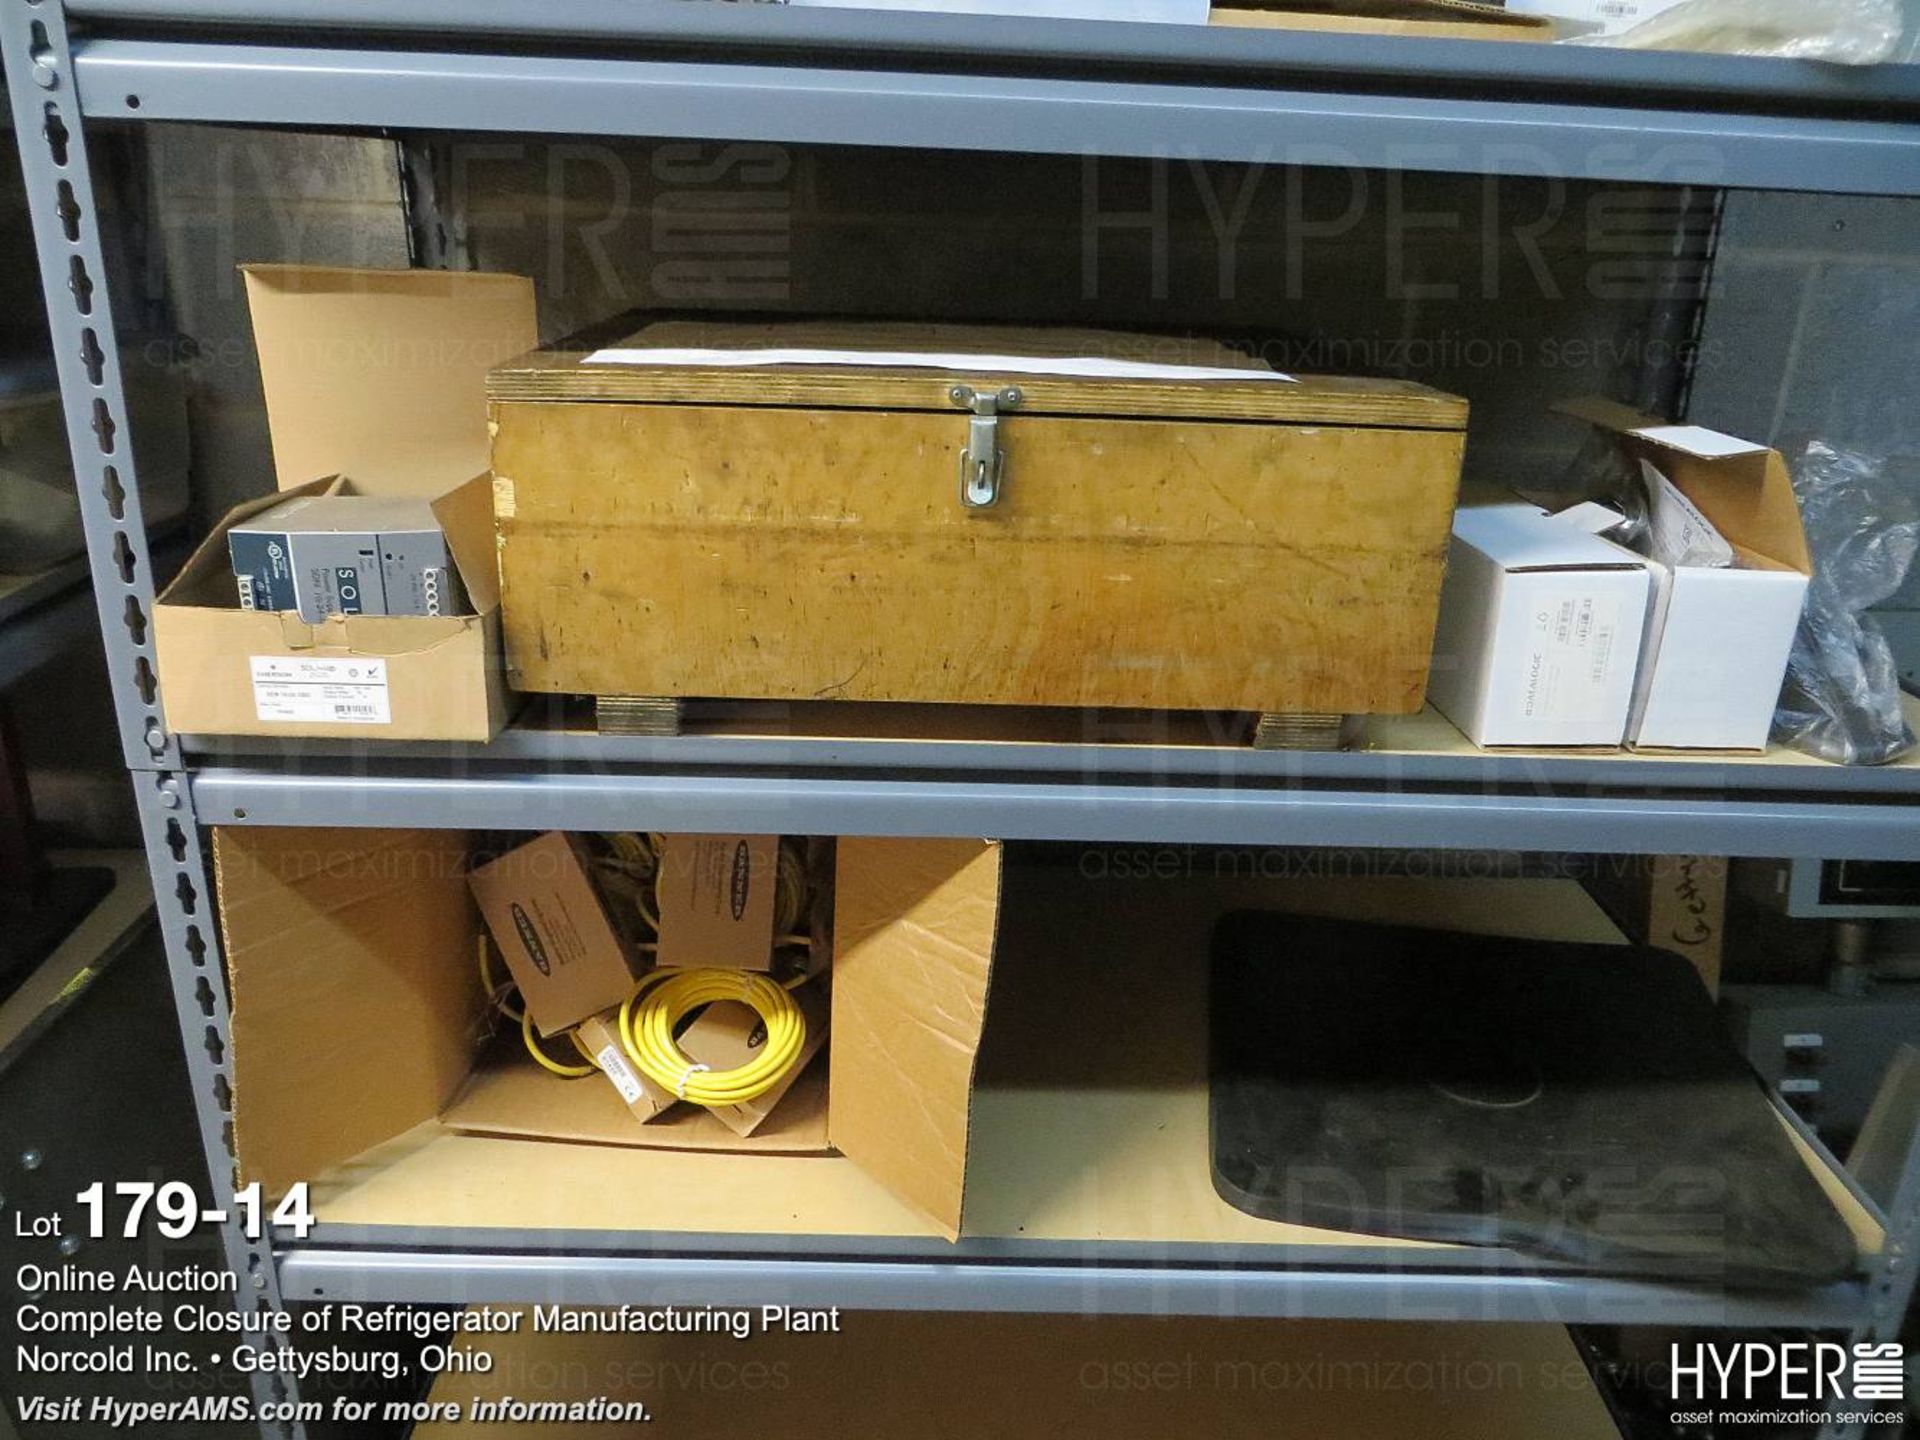 (lot) various MRO parts and supplies in room - Image 15 of 18